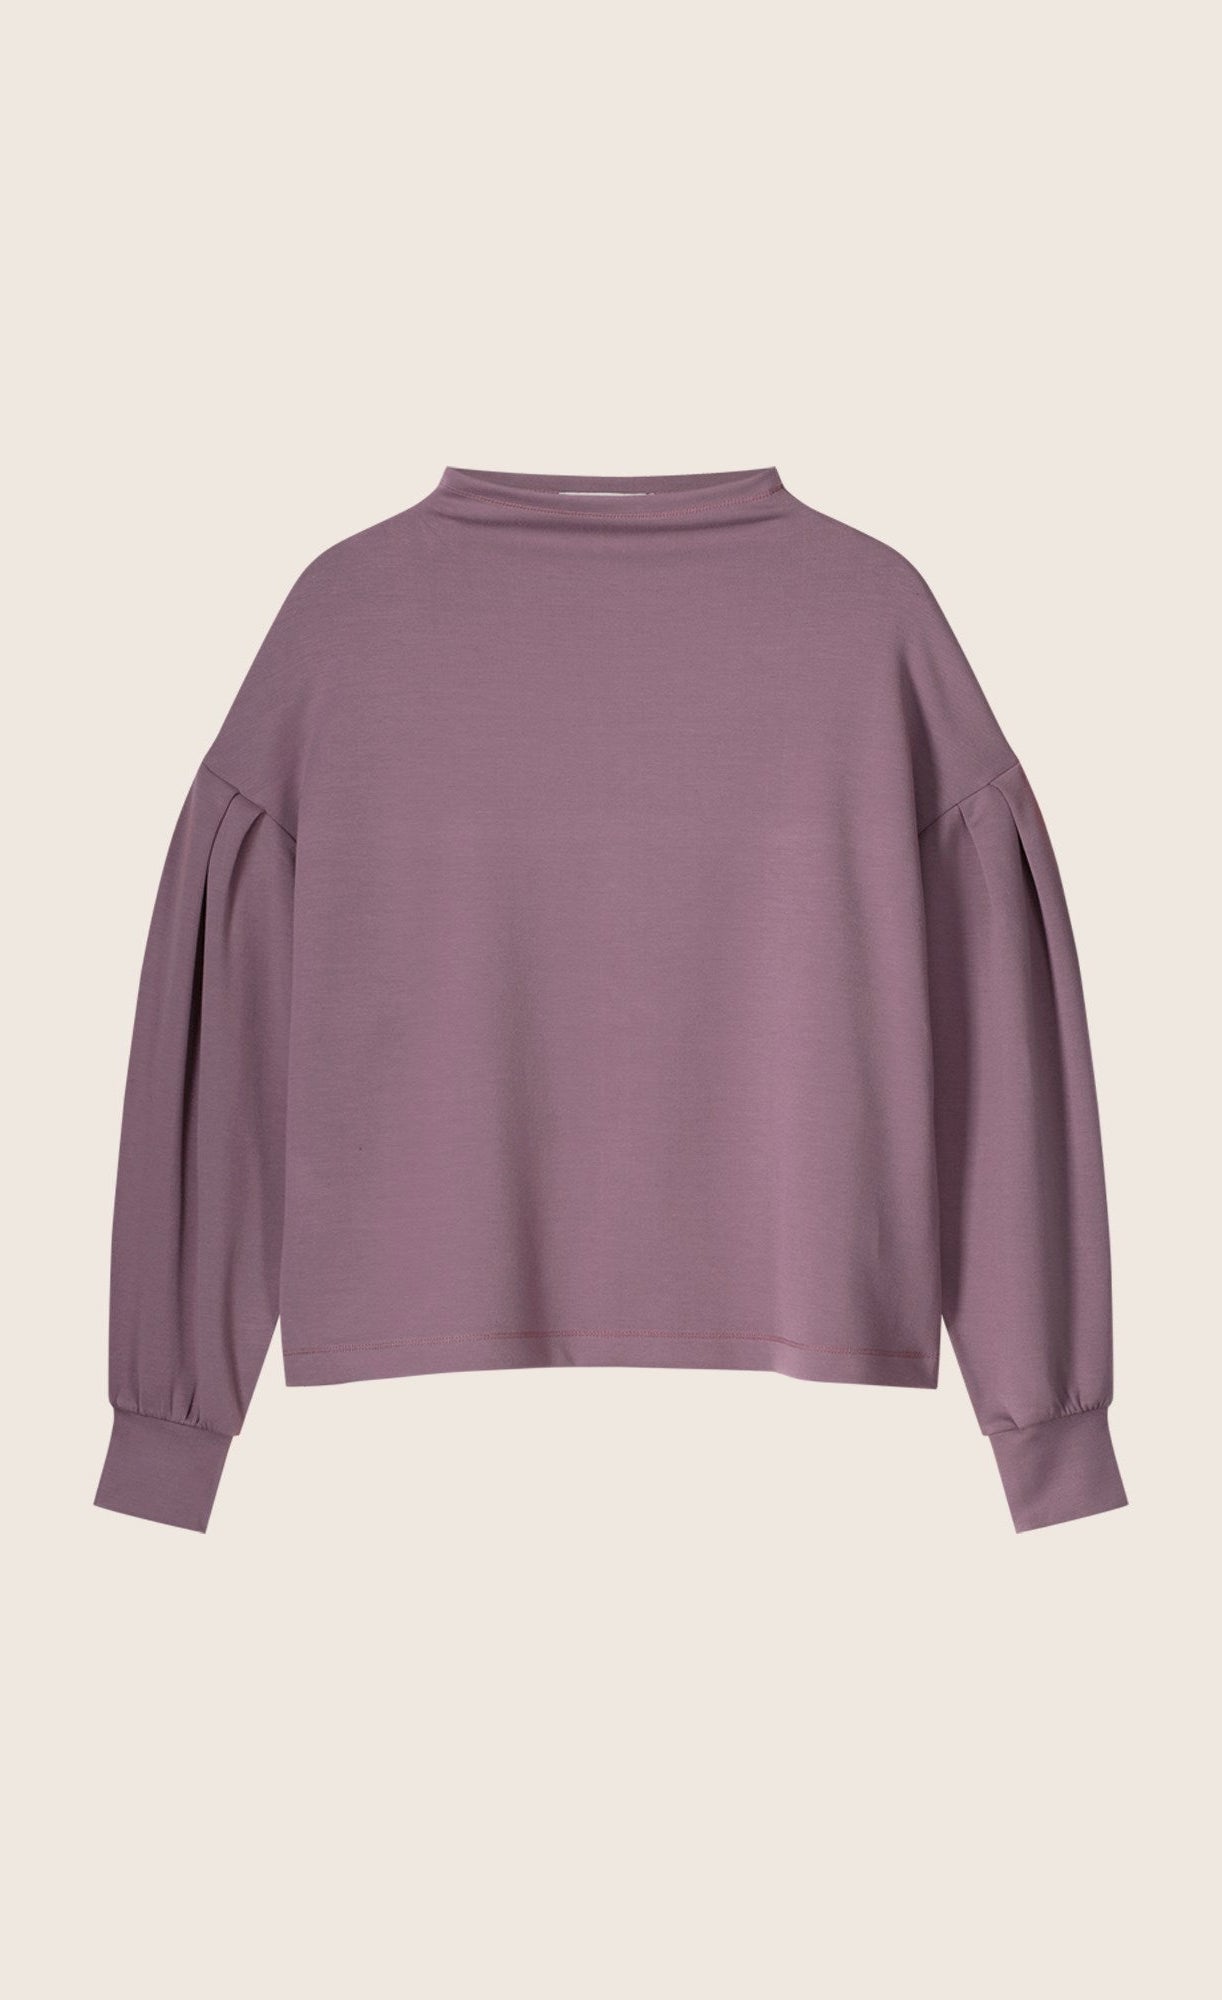 Front view of the summum scuba pullover. This pullover is mauve colored, has drop shoulders, long puff sleeves, and cuffs. The top also has a boat neck.